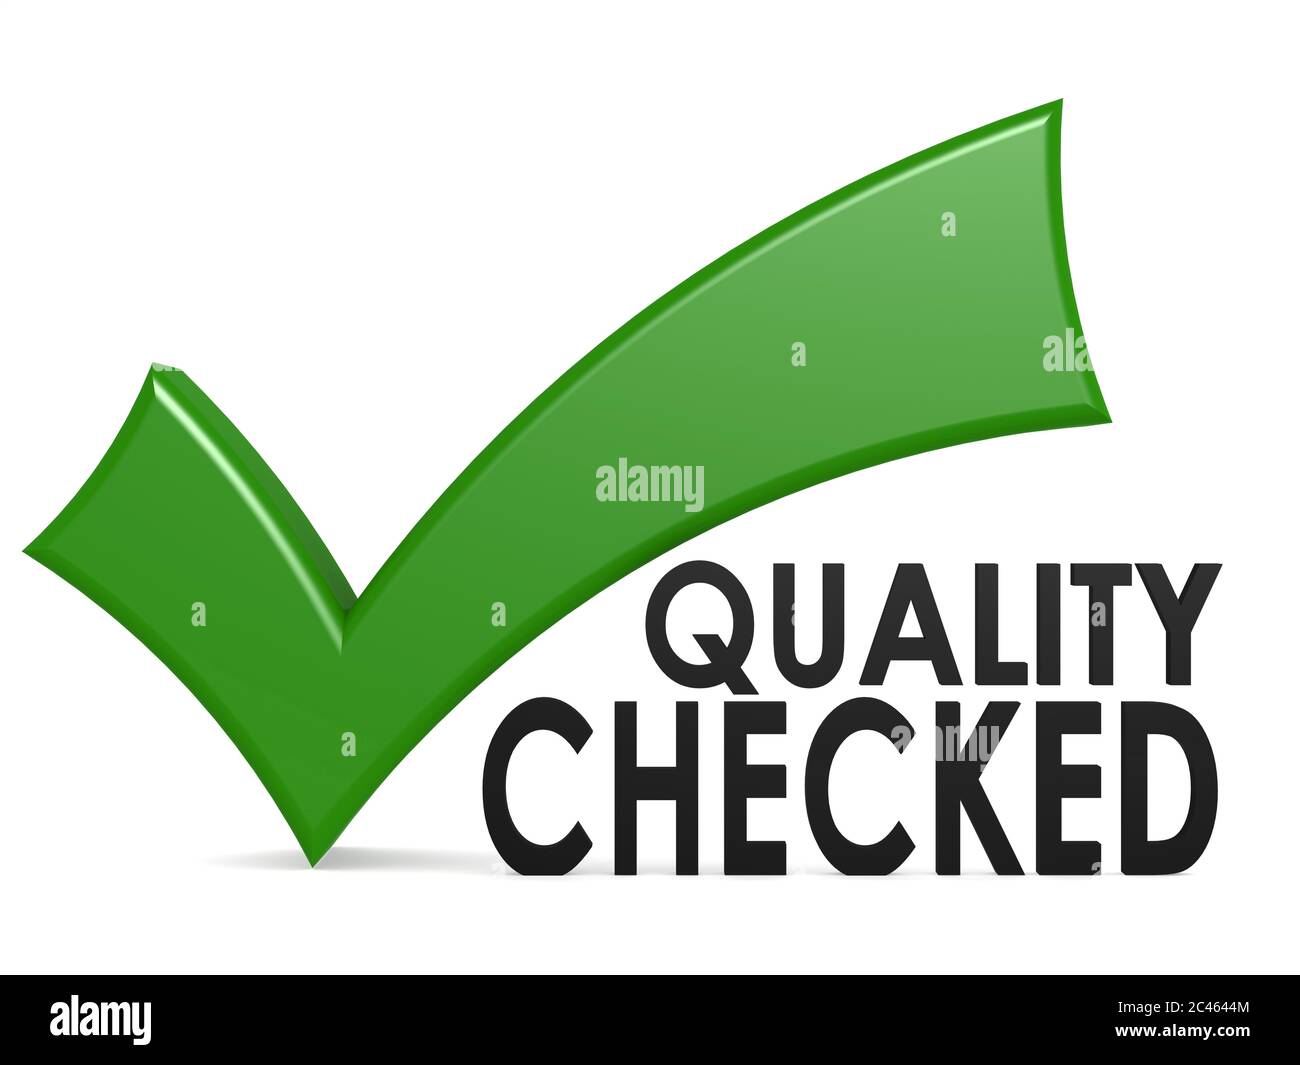 Quality checked word with green check mark, 3D rendering Stock Photo